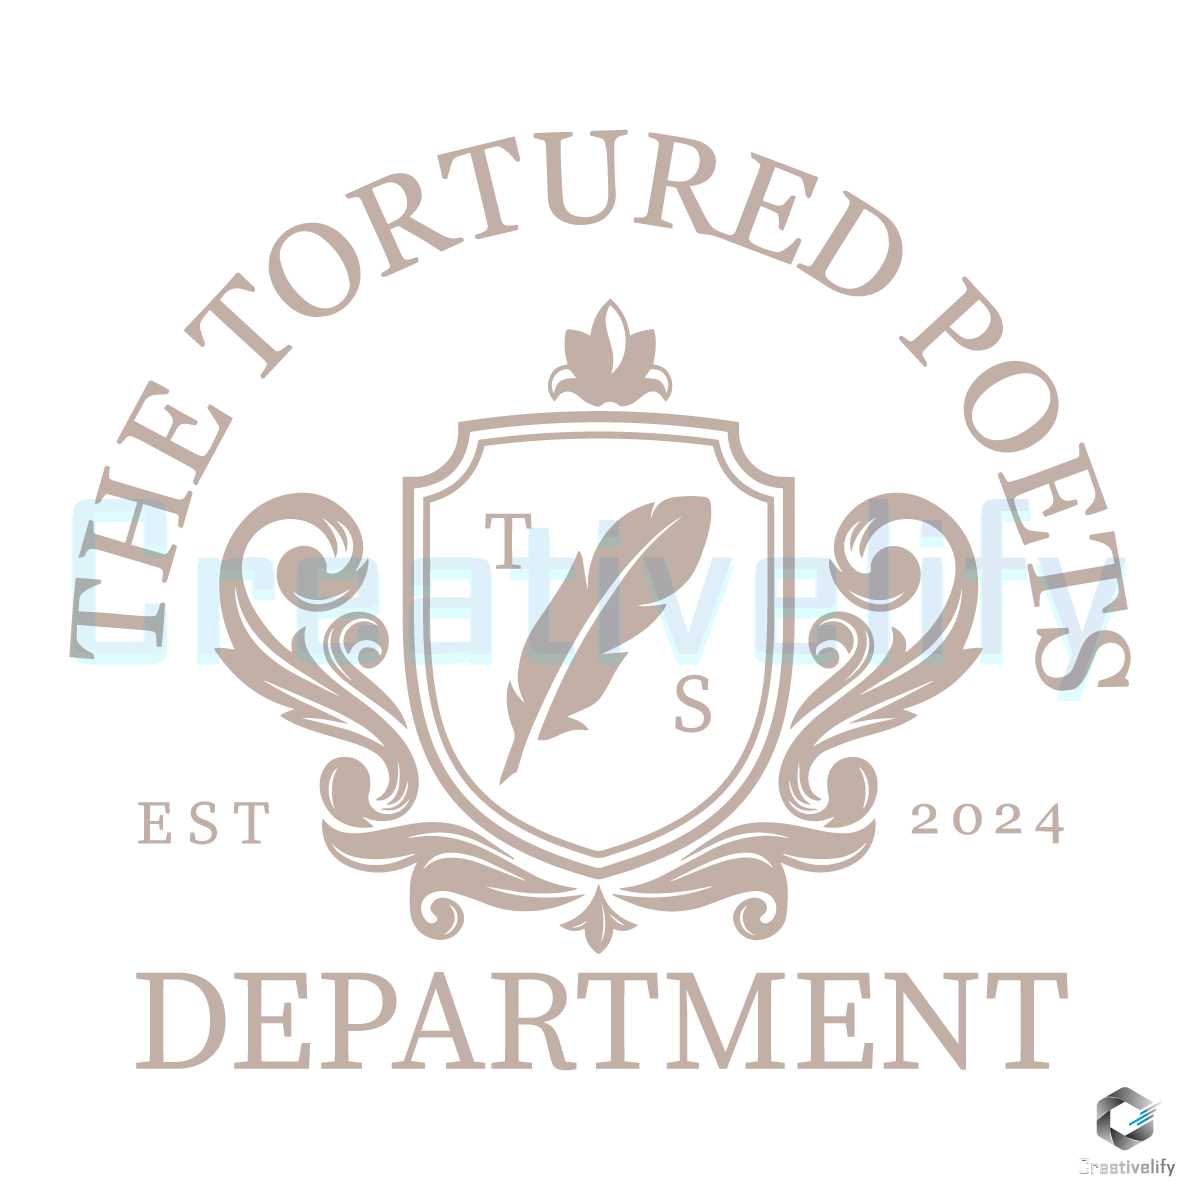 The Tortured Poets Department Taylor 2024 SVG - CreativeLify